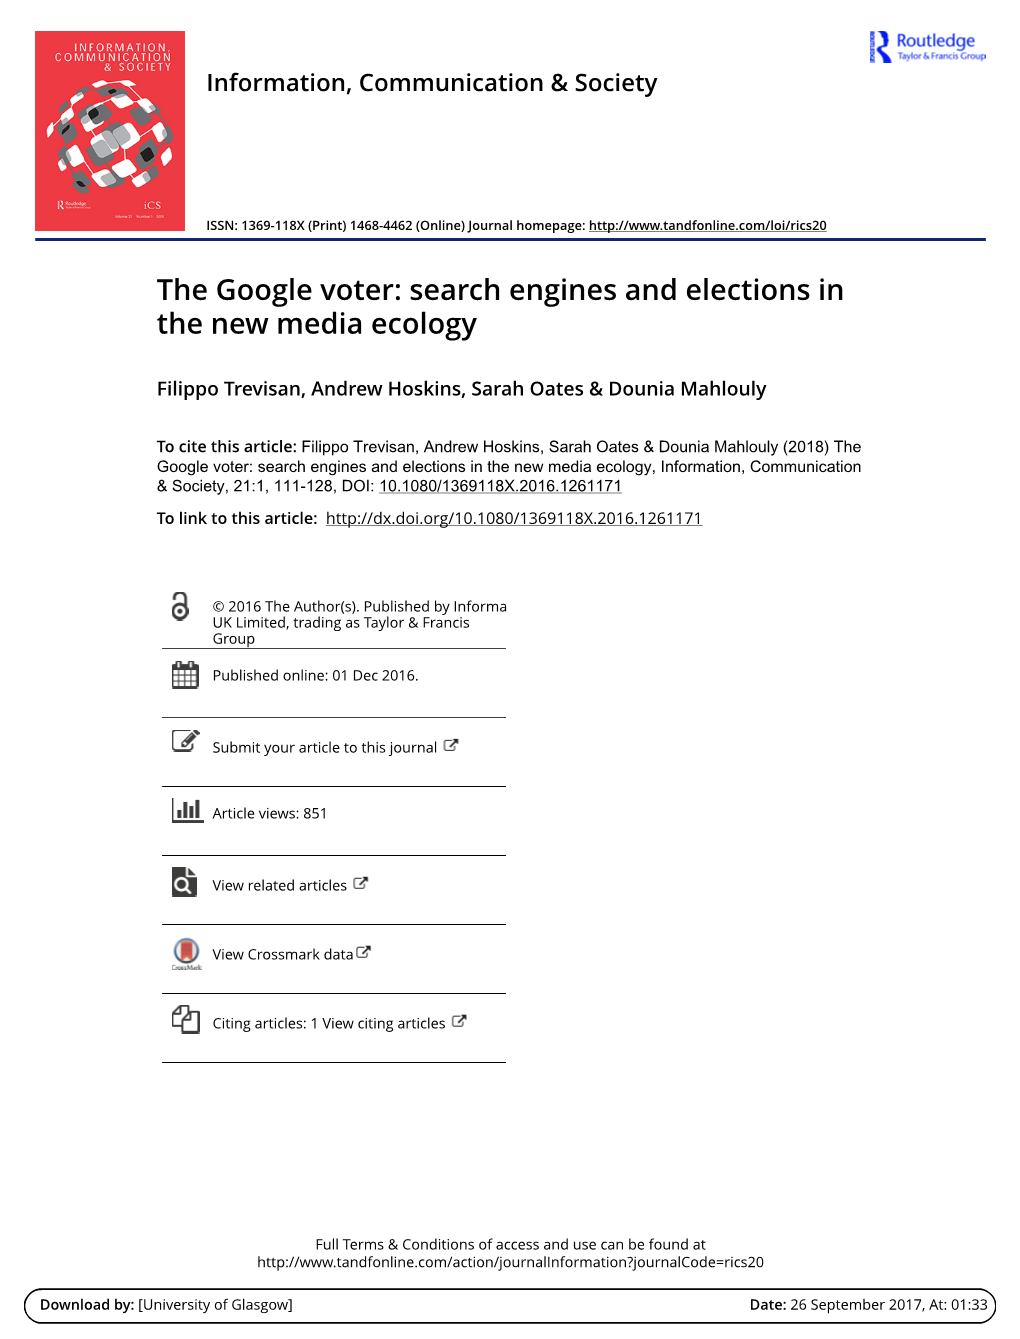 The Google Voter: Search Engines and Elections in the New Media Ecology